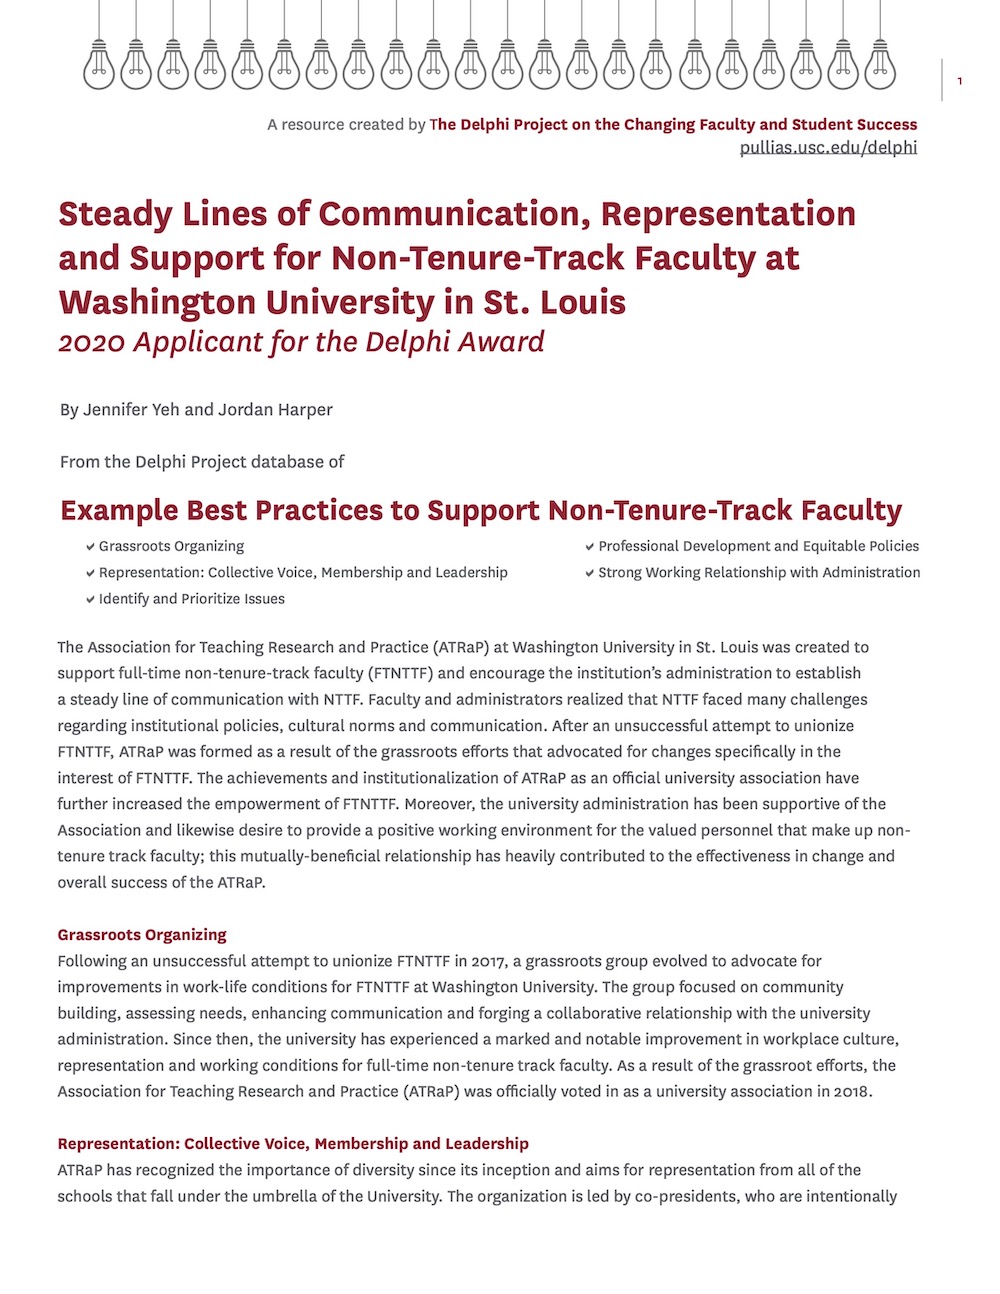 Steady Lines of Communication, Representation and Support for Non-Tenure-Track Faculty at Washington University in St. Louis